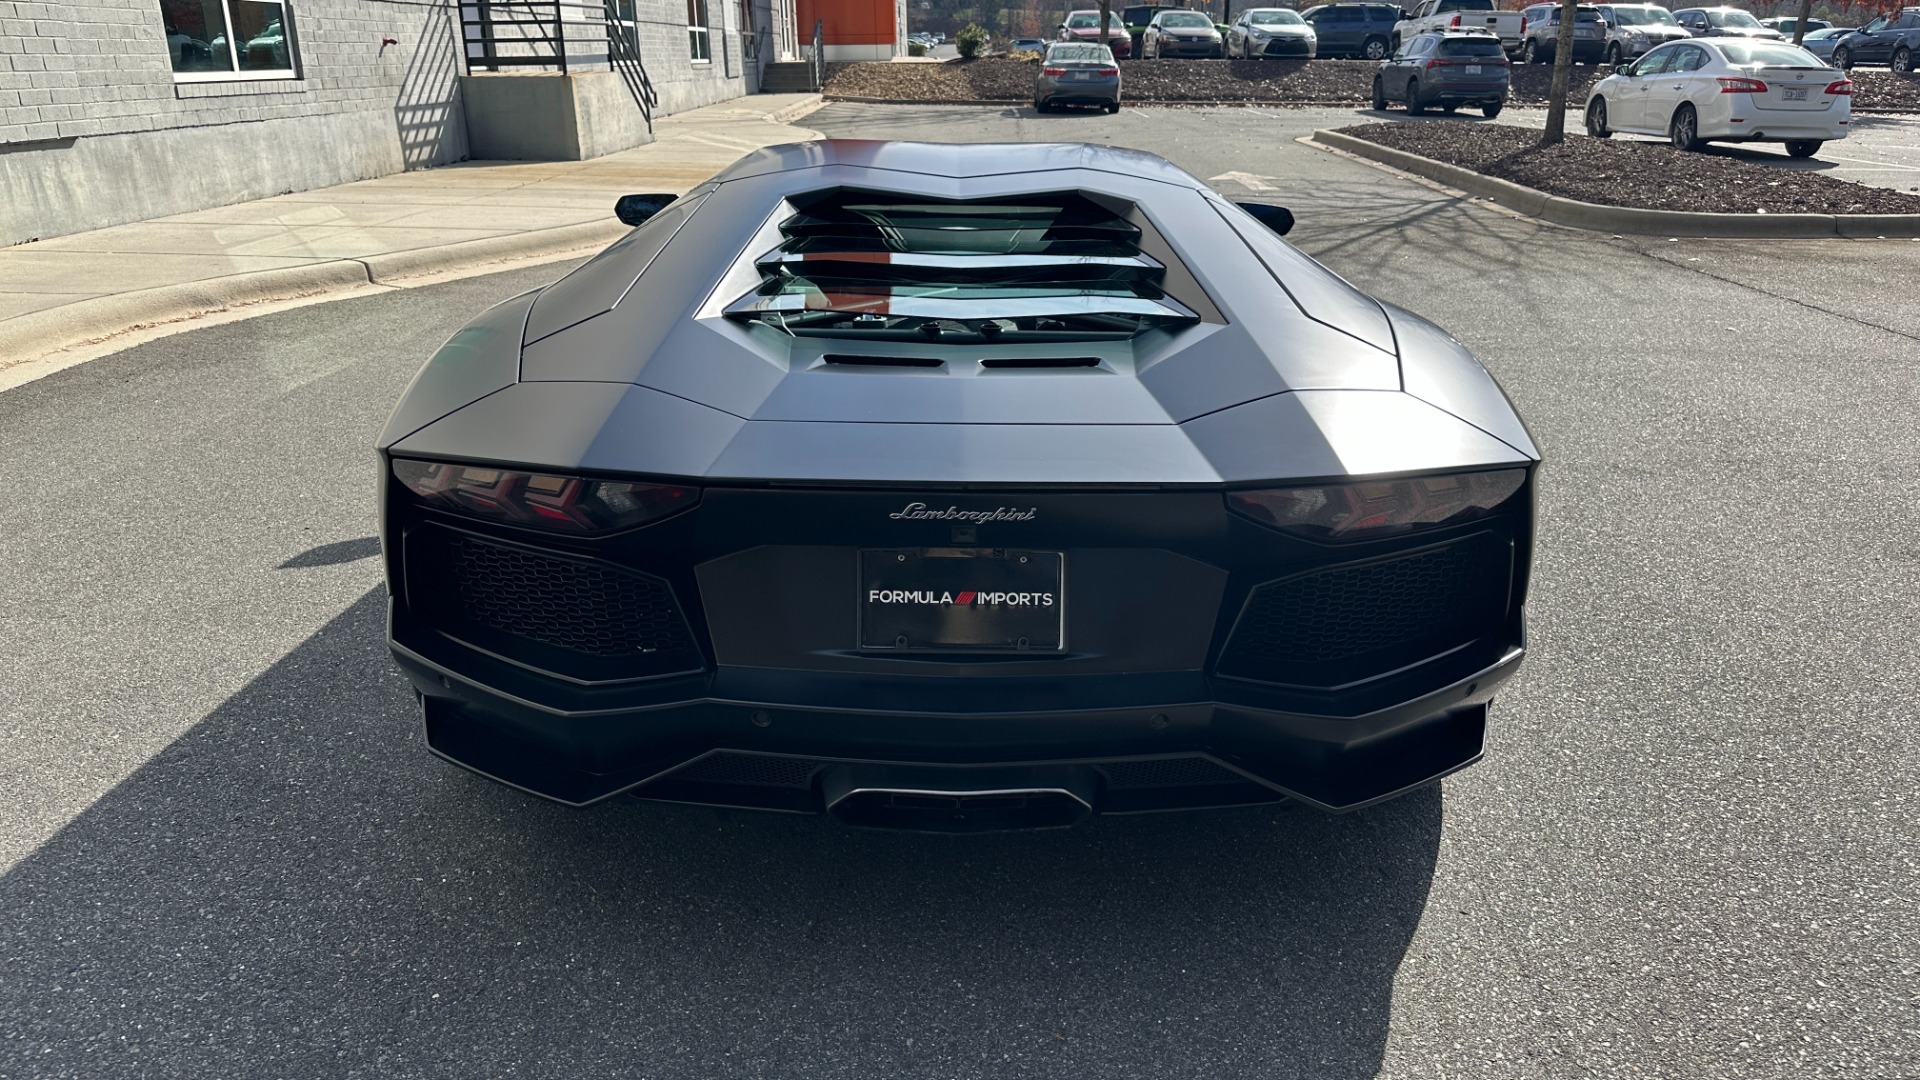 Used 2013 Lamborghini Aventador LP 700-4 / FULL PAINT PROTECTION / MATTE PAINT / FORGED WHEELS / GLASS ENGI for sale $311,000 at Formula Imports in Charlotte NC 28227 8